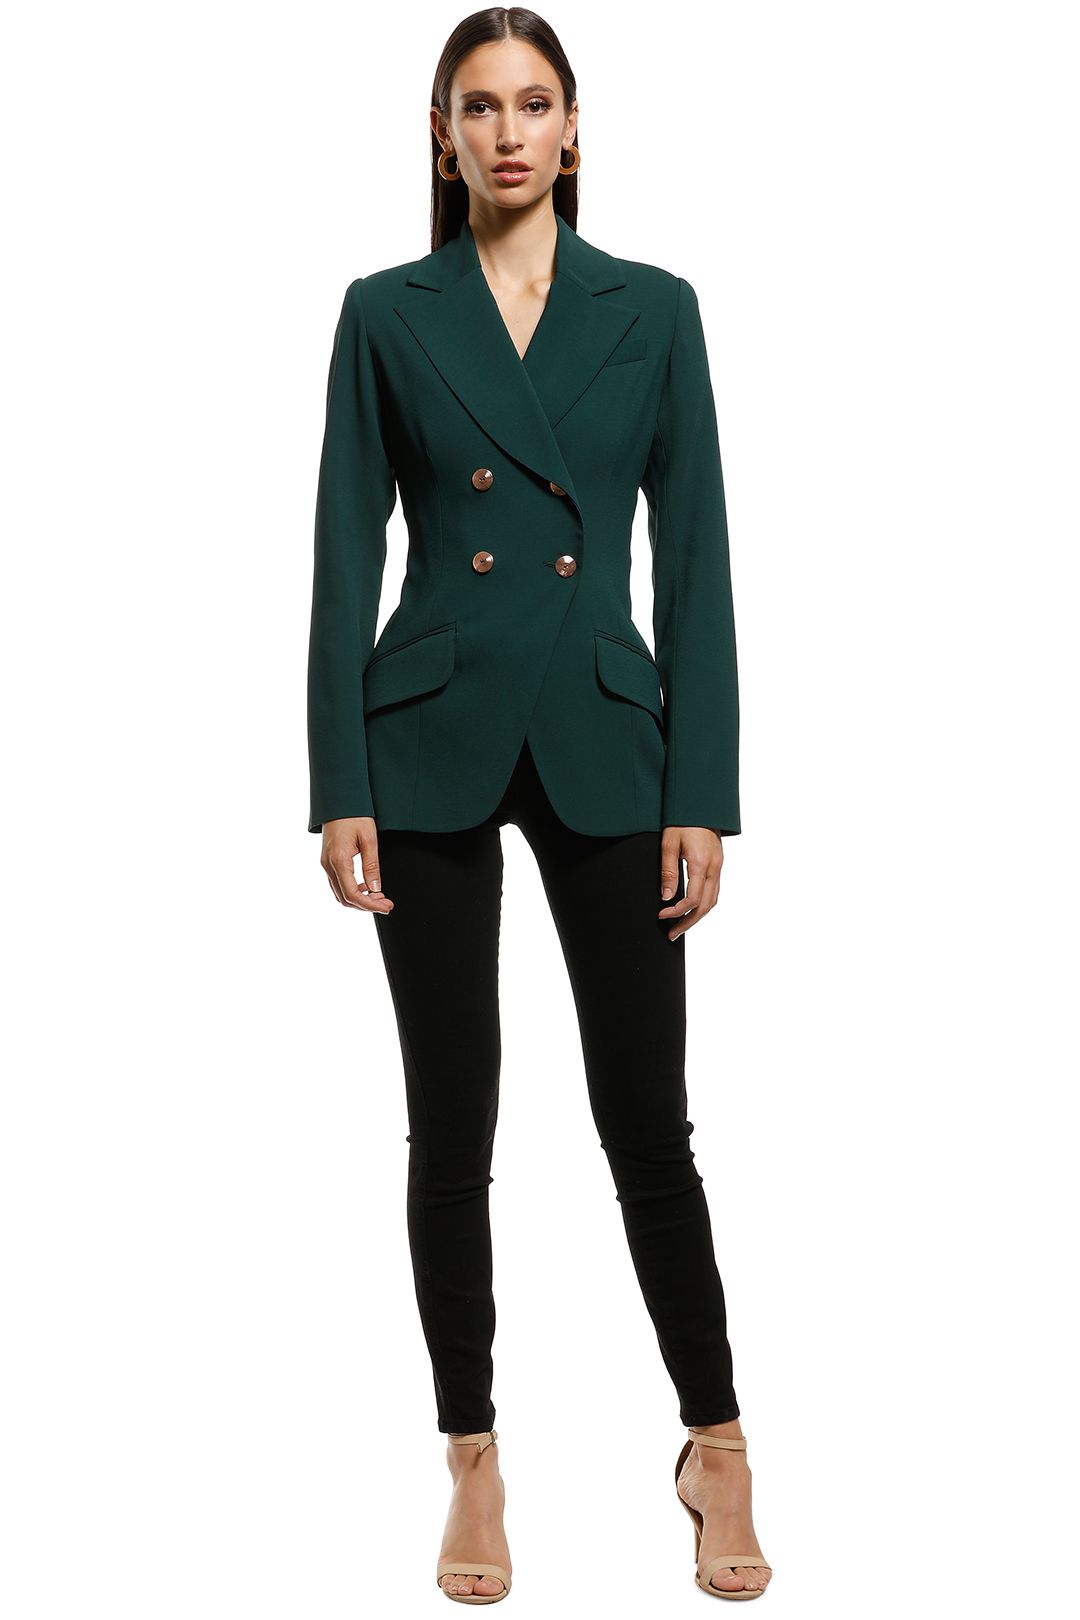 Ginger and Smart - Parity Jacket - Green - Front